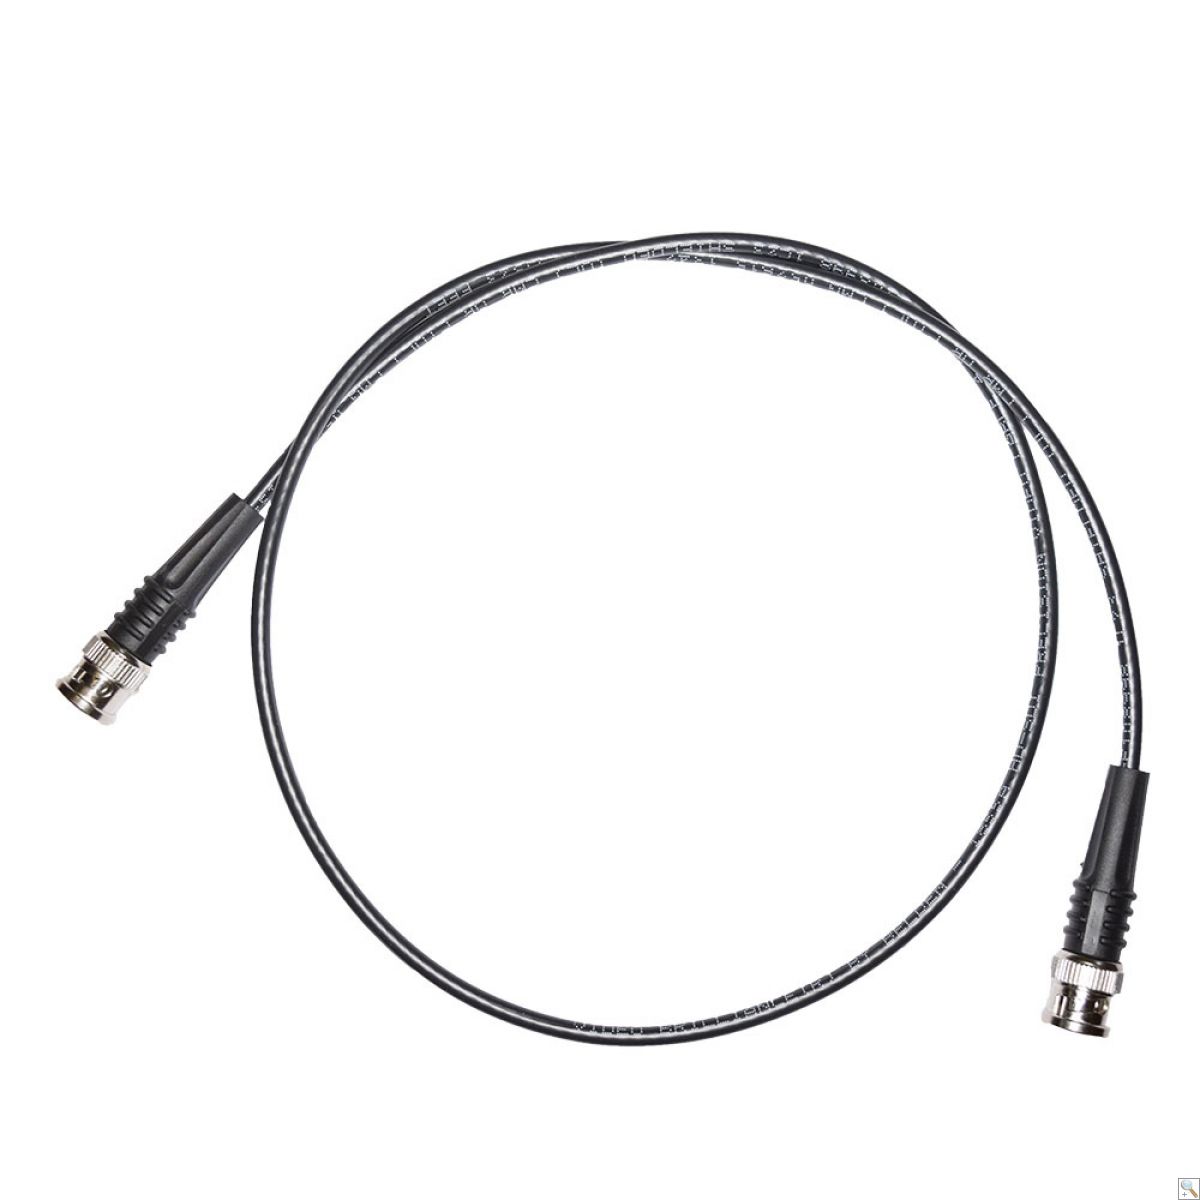 Belden 1855A Cable Assembly - 10M